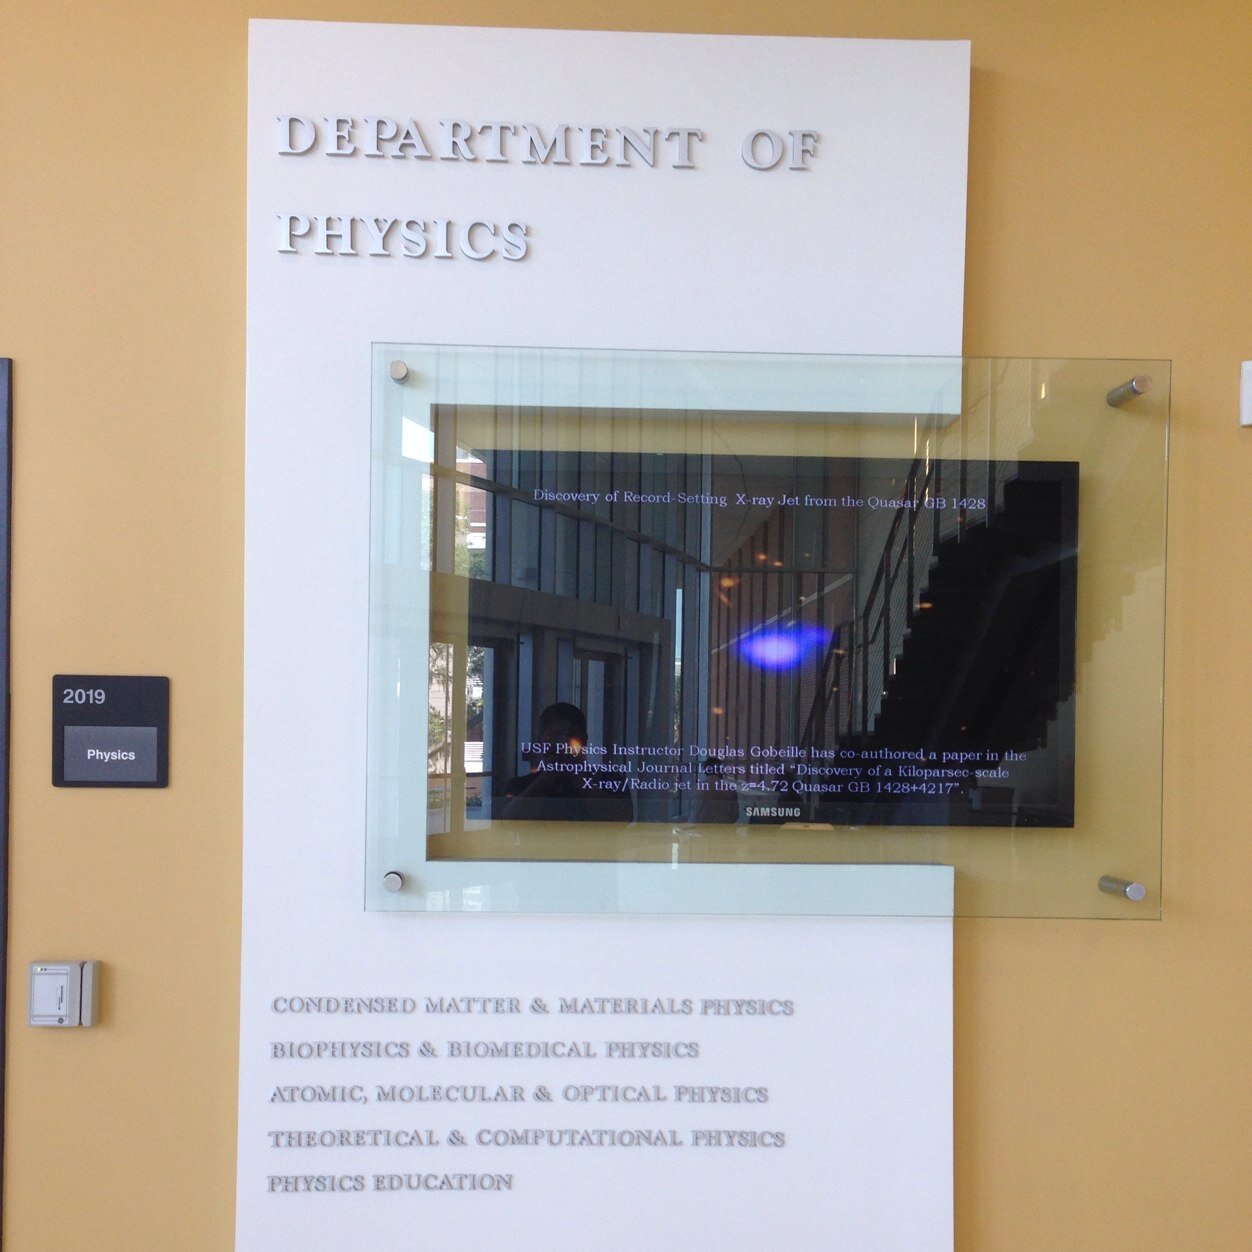 Official Twitter Page of the Department of Physics at the University of South Florida. Retweet ≠ Endorsement.